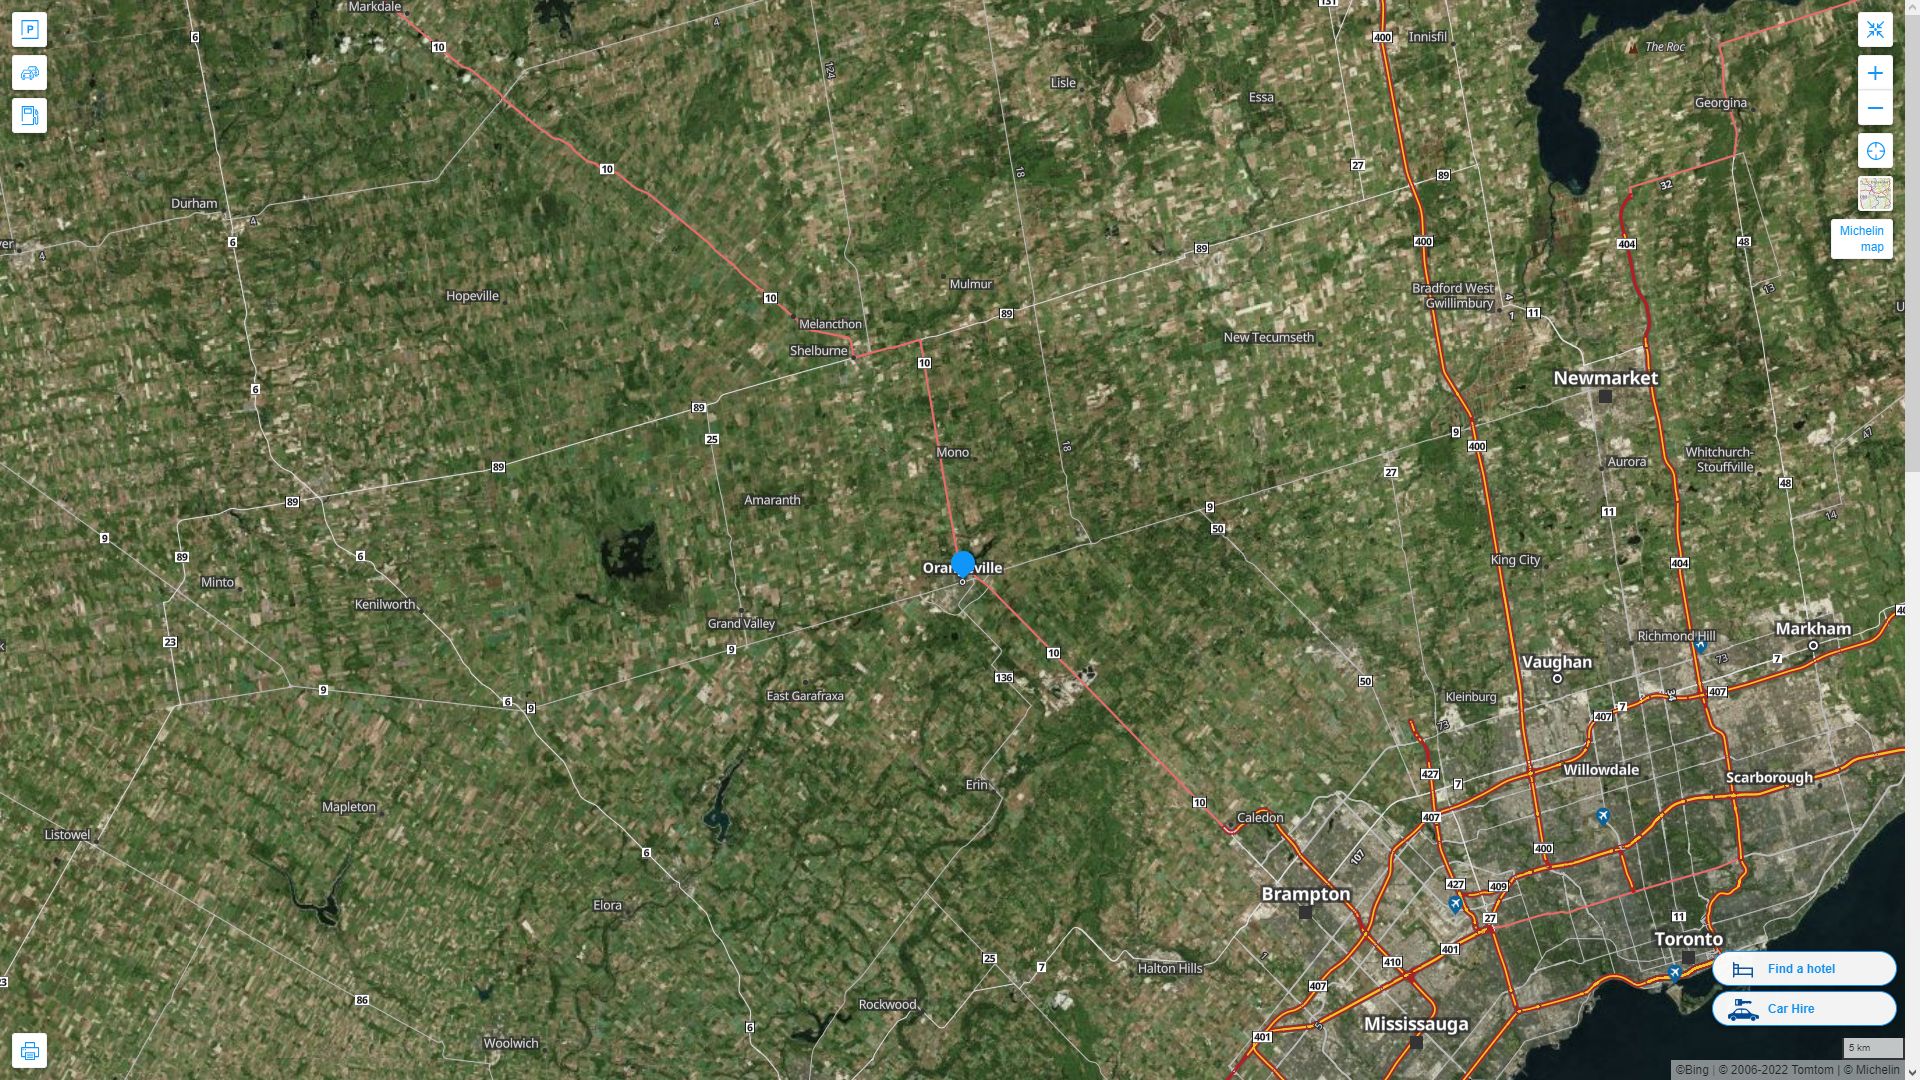 Orangeville Highway and Road Map with Satellite View